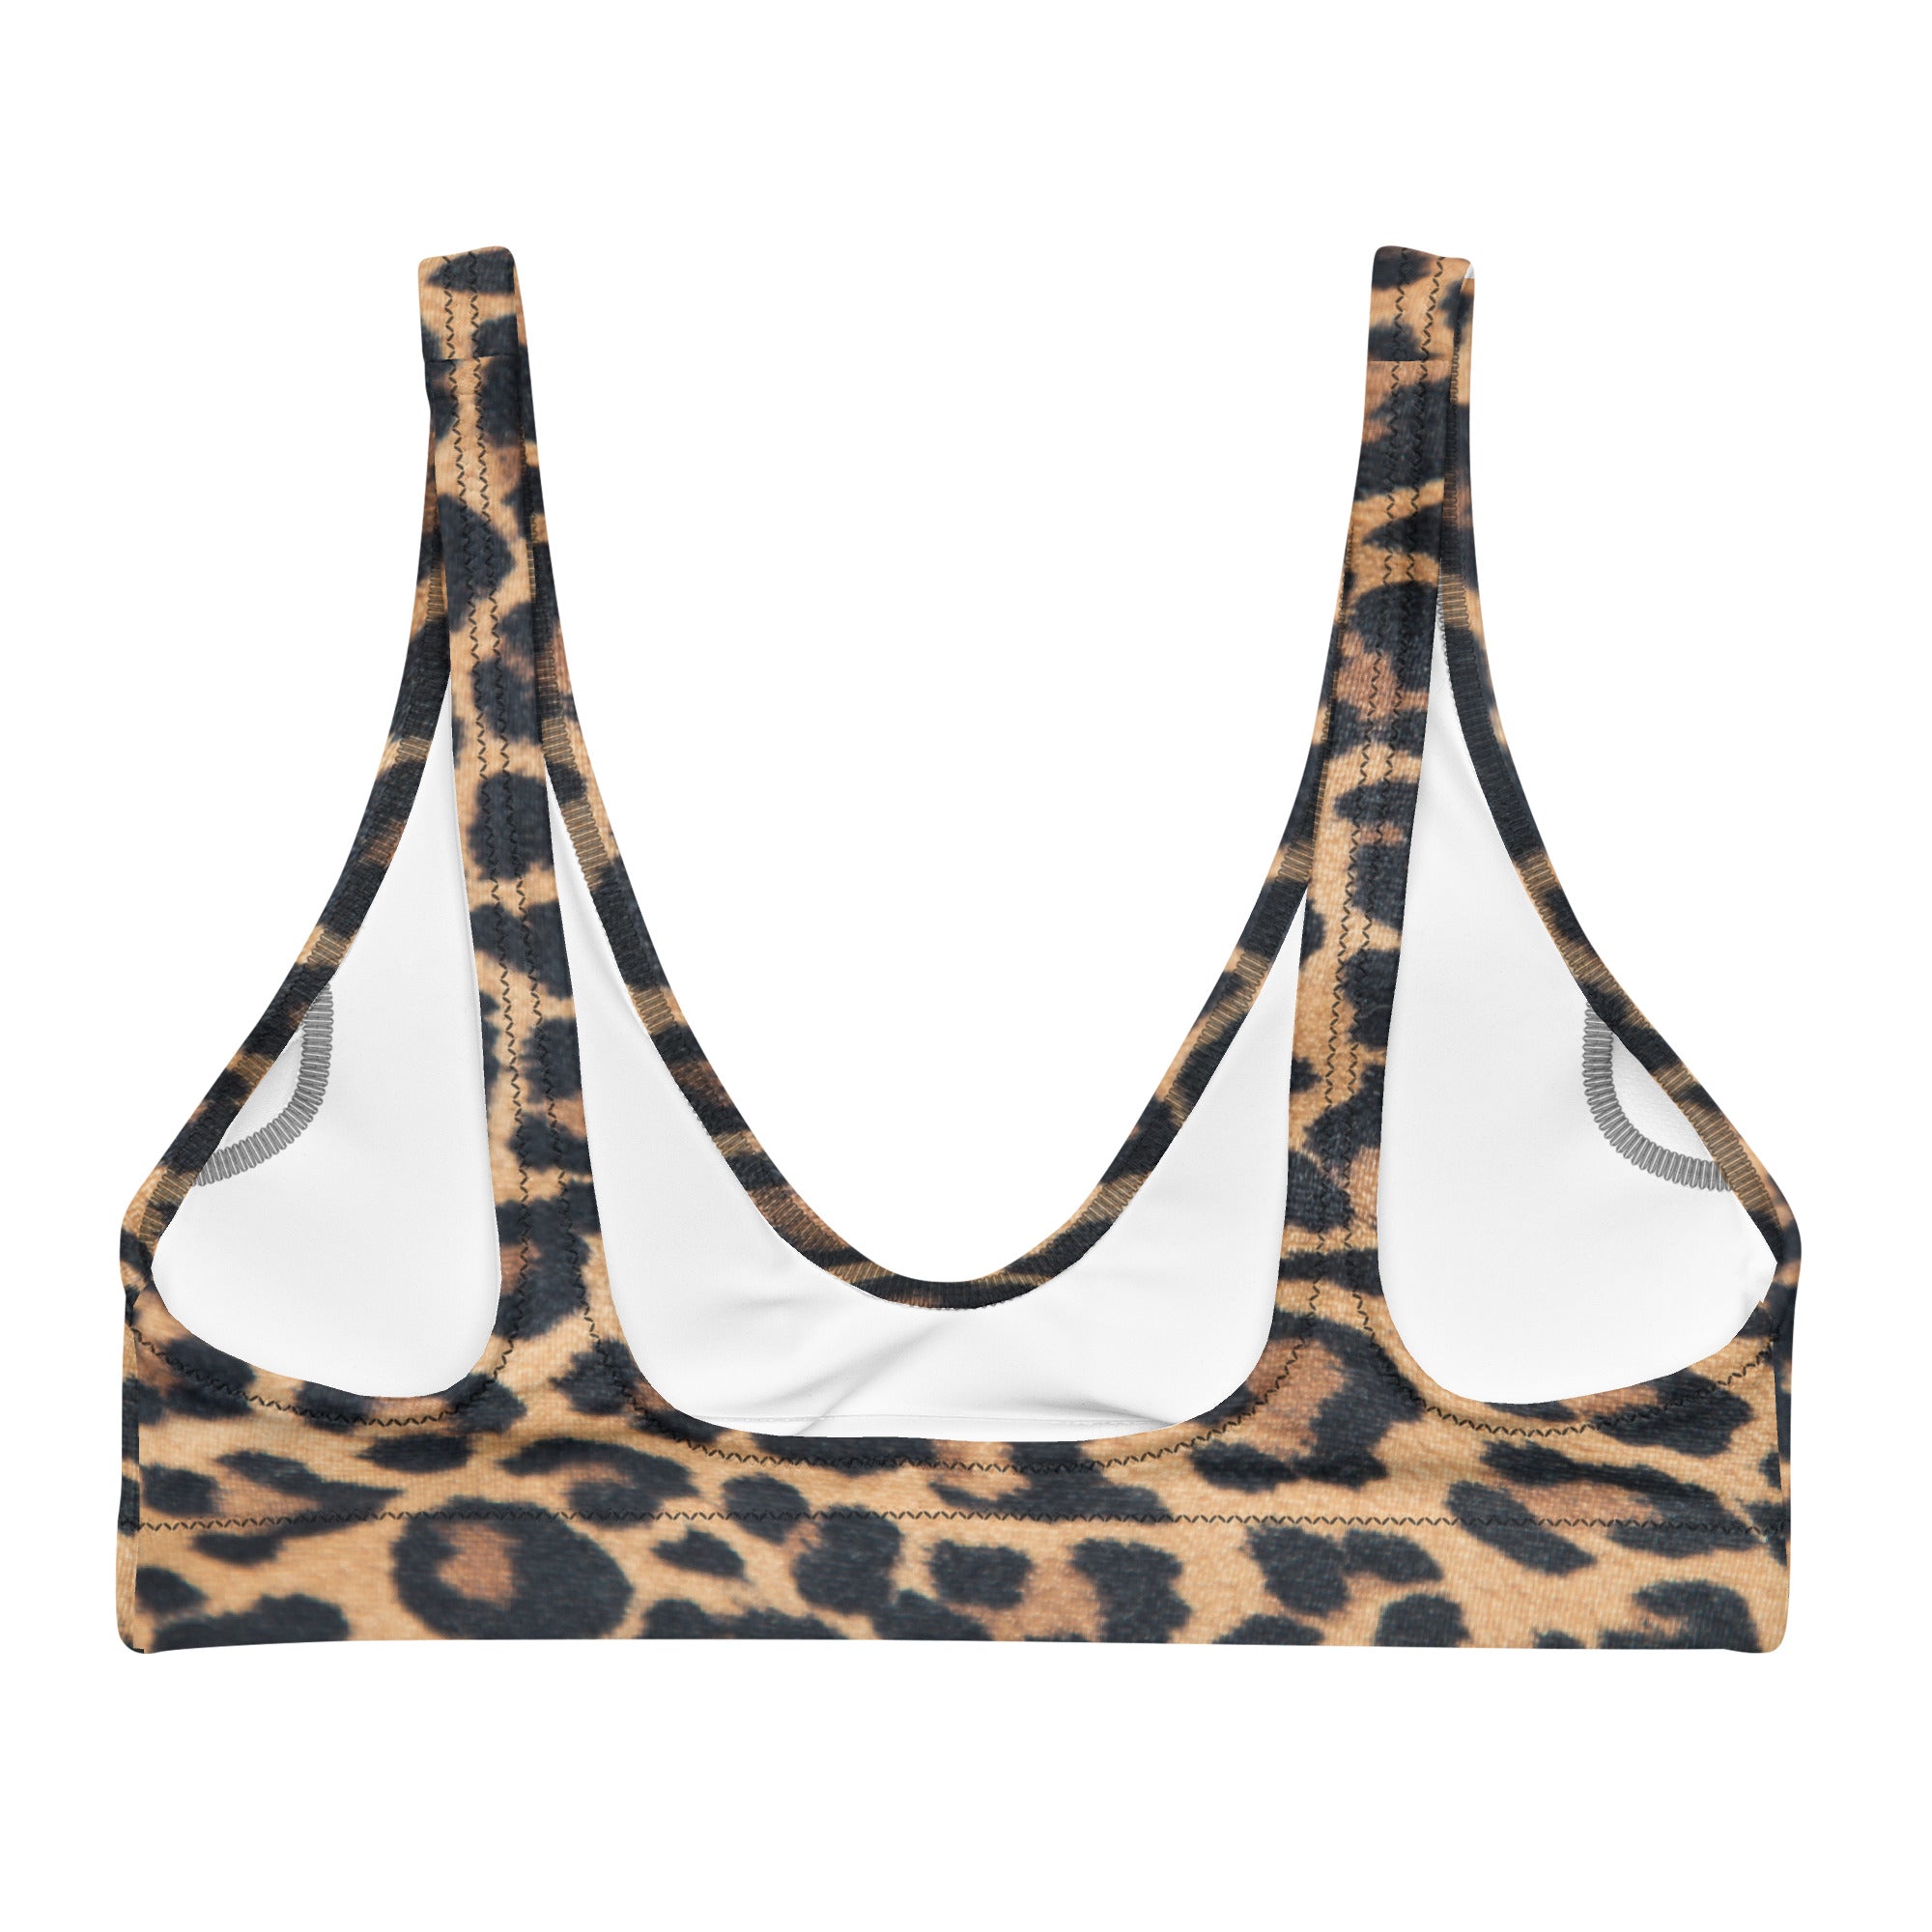 Whether you're lounging by the pool or soaking up the sun on the beach, our Leopard Print Bikini Top is the perfect choice for fashion-forward women who love to make a statement.